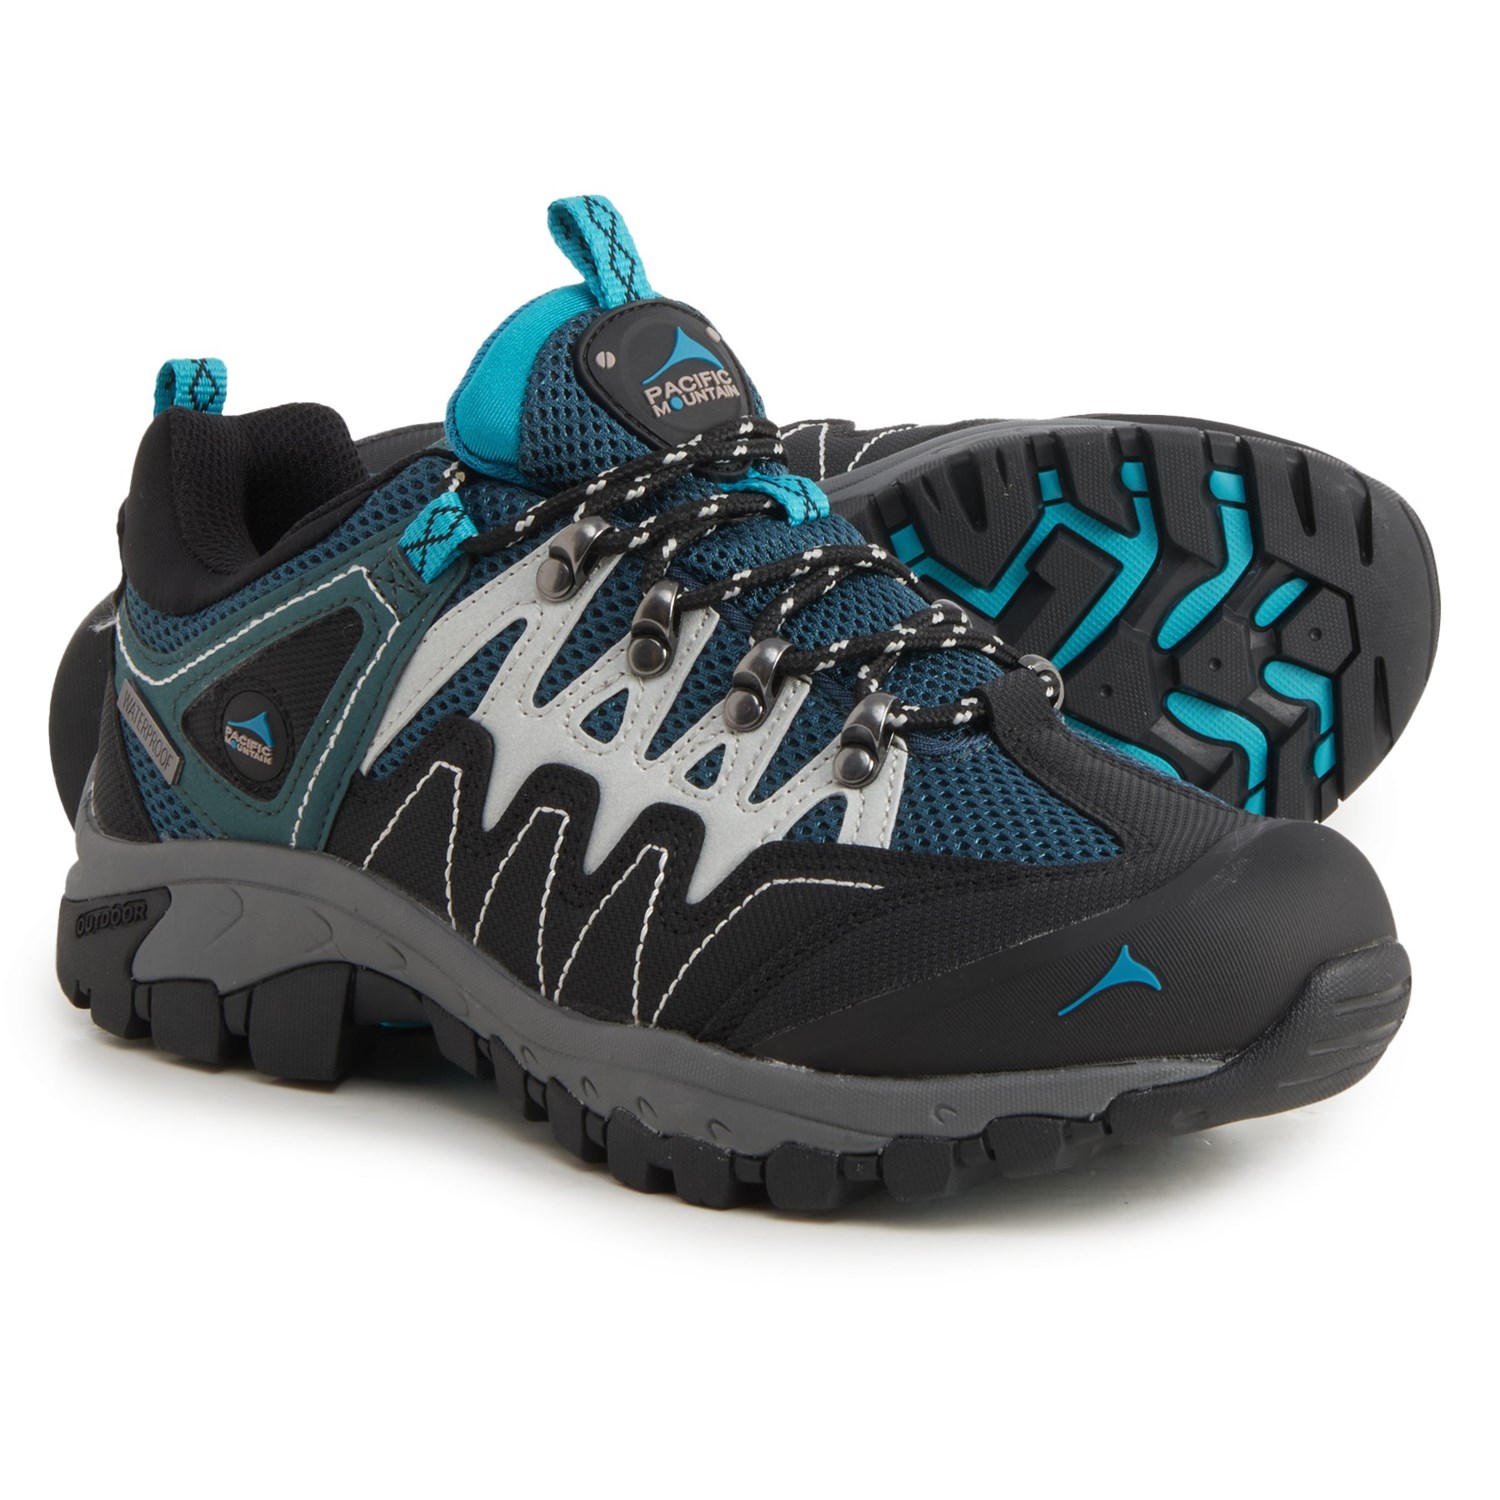 Pacific Mountain Cheyenne Low Hiking Shoes (For Women) - Save 41%